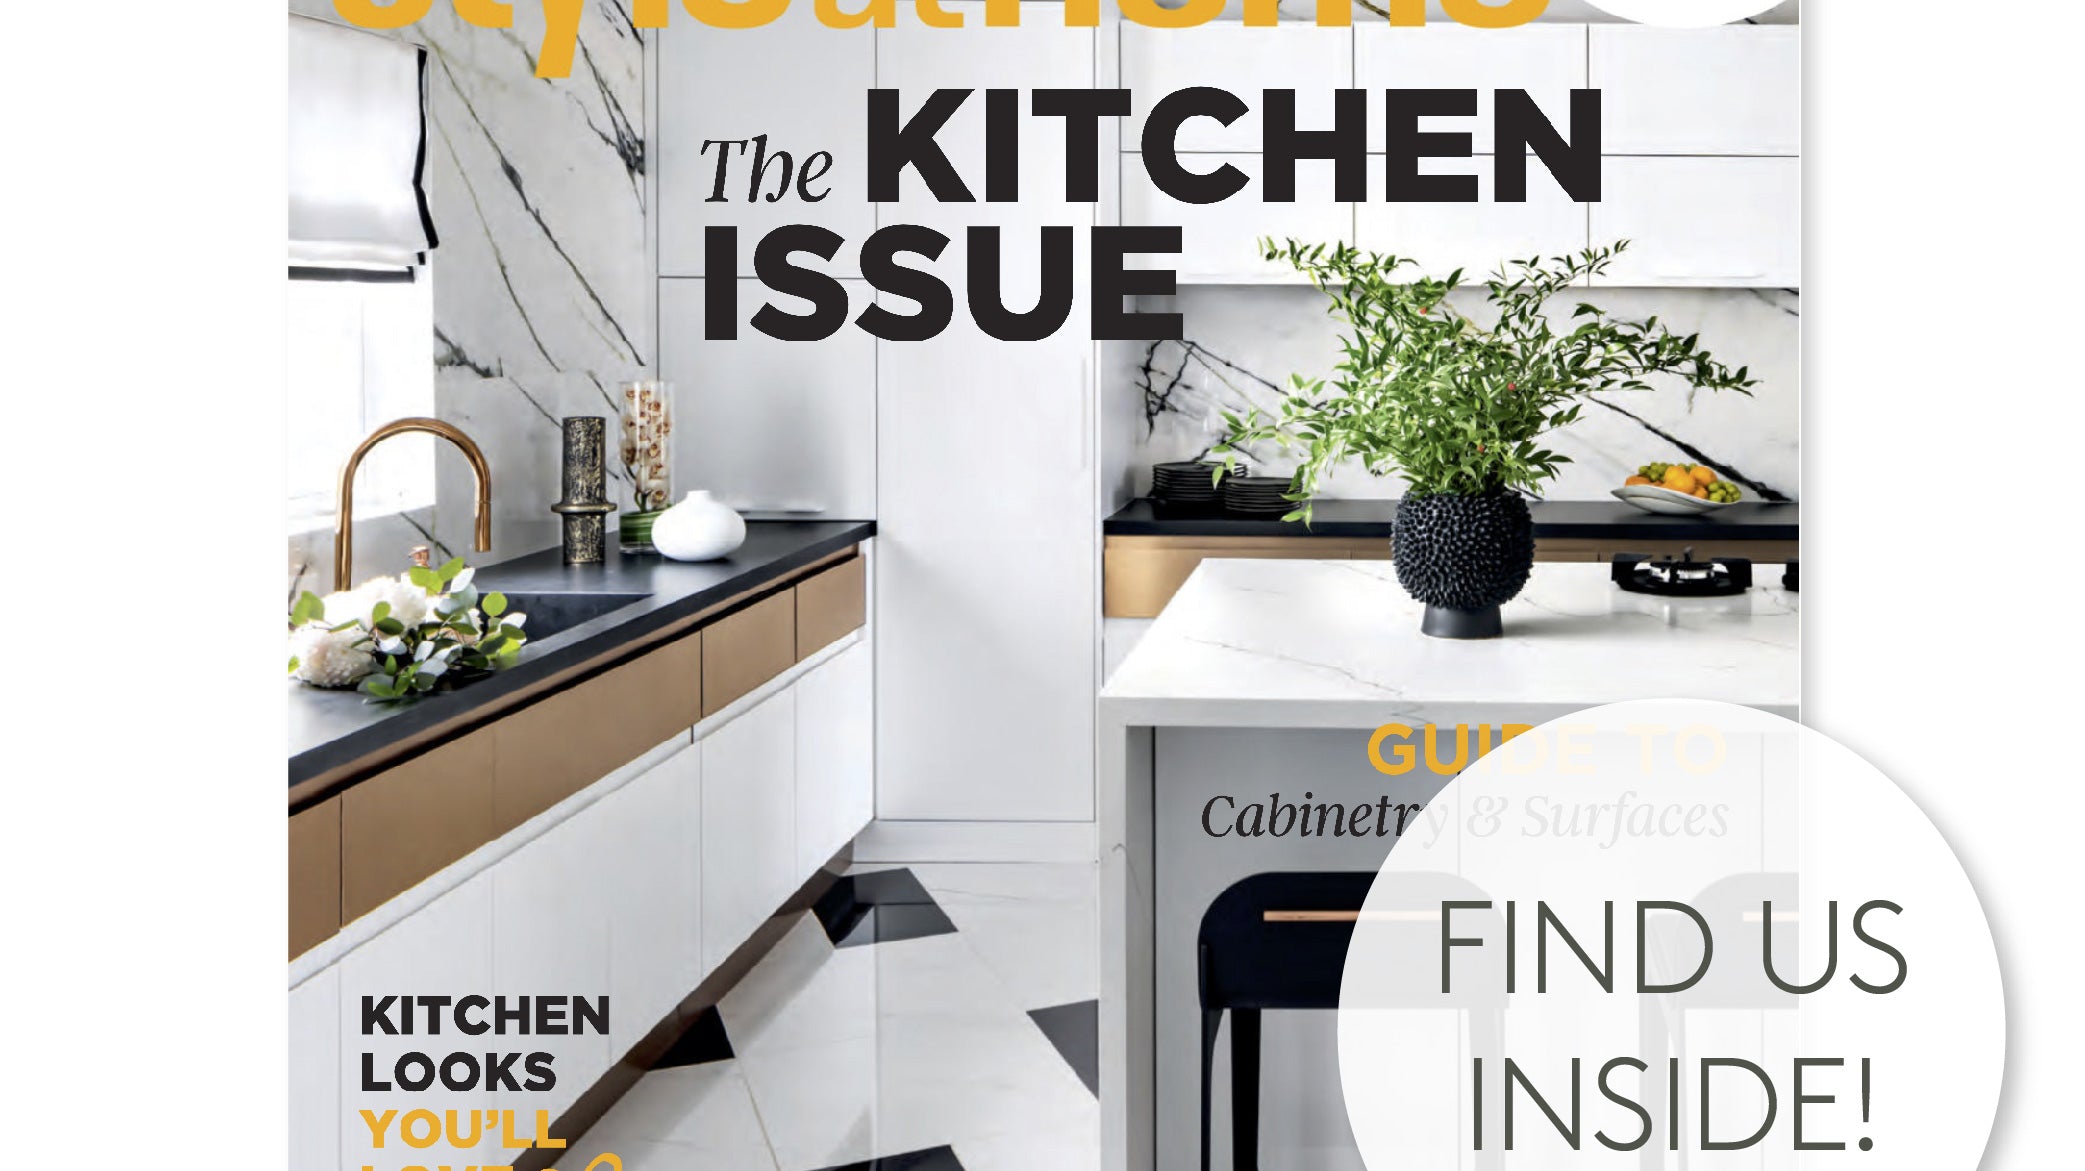 Style At Home Magazine - Kitchens 2021